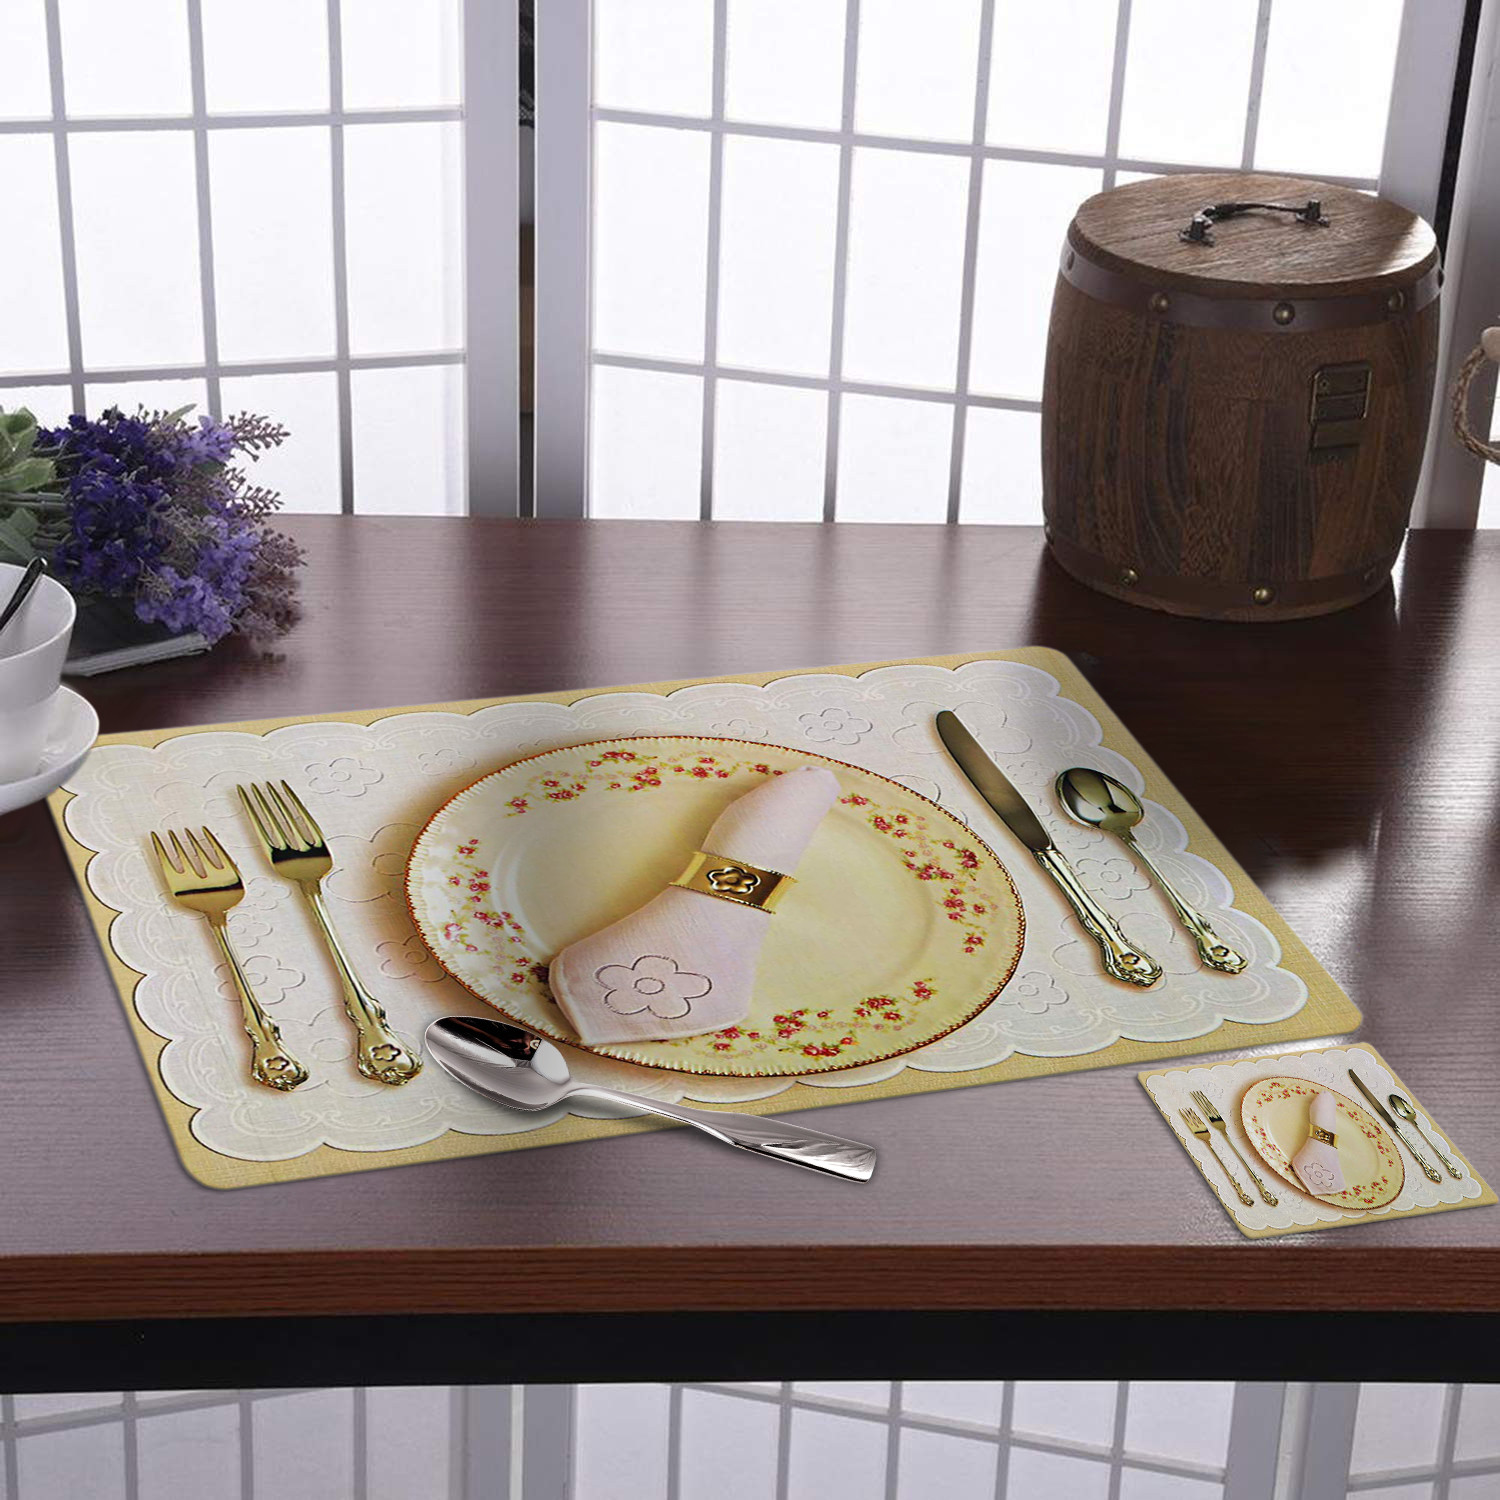 Kuber Industries Multiuses Plate & Spoon Print PVC Table Placemat With 6 Coasters for kitchen, Dining Table Set of 6 (Golden)